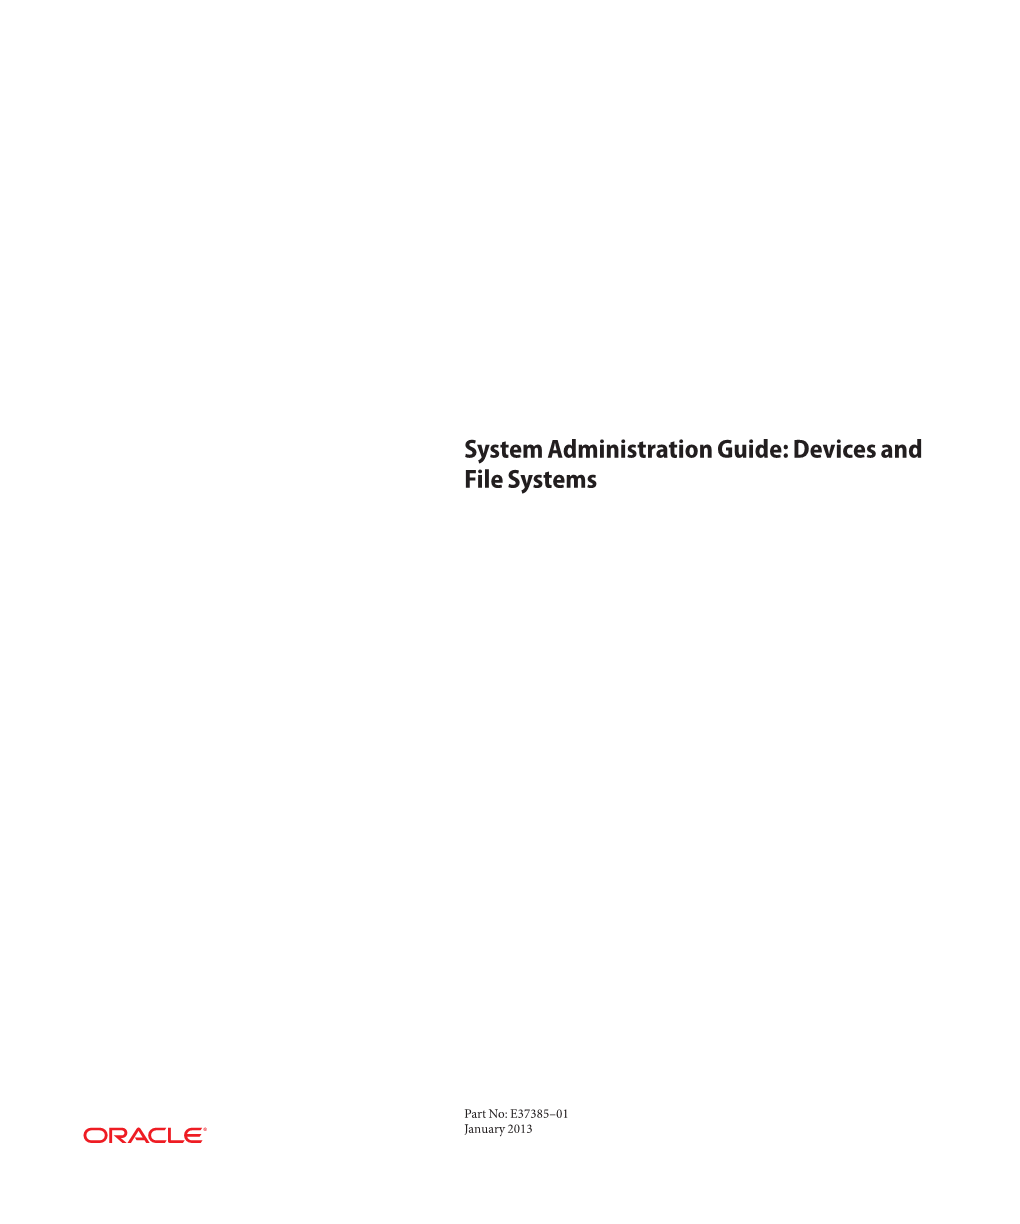 System Administration Guide Devices and File Systems